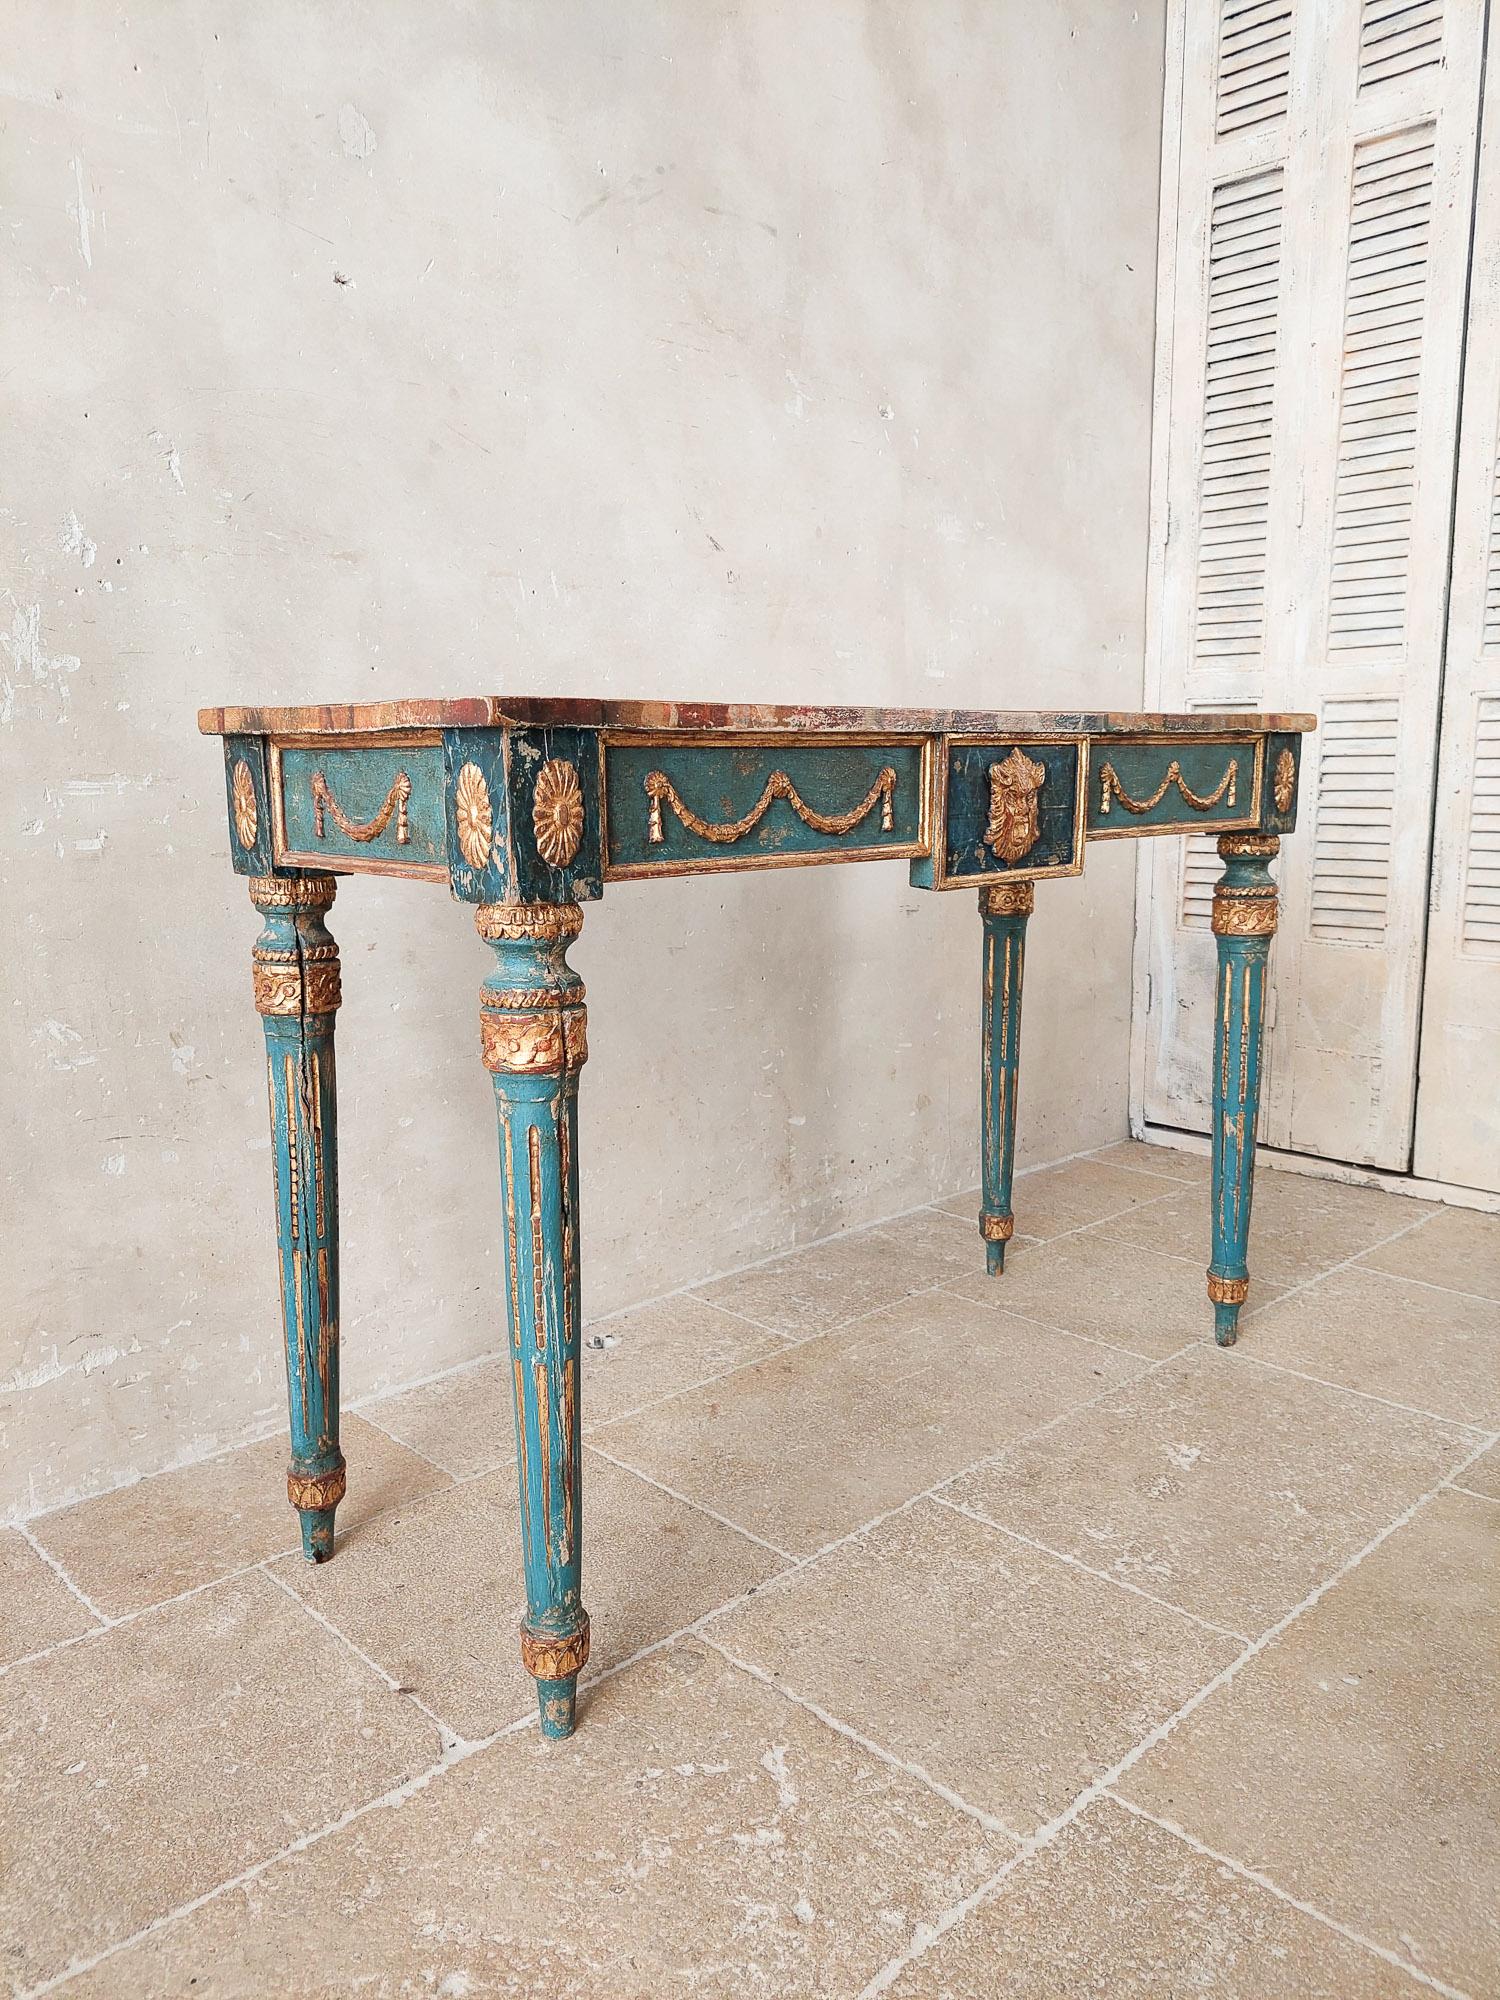 An Italian Neoclassical console table patinated in blue, with golden details; guirlandes, rosettes and a lions head in the centre and fluted legs. Very attractive sidetable with painted faux marble top from early 20th century Italy.